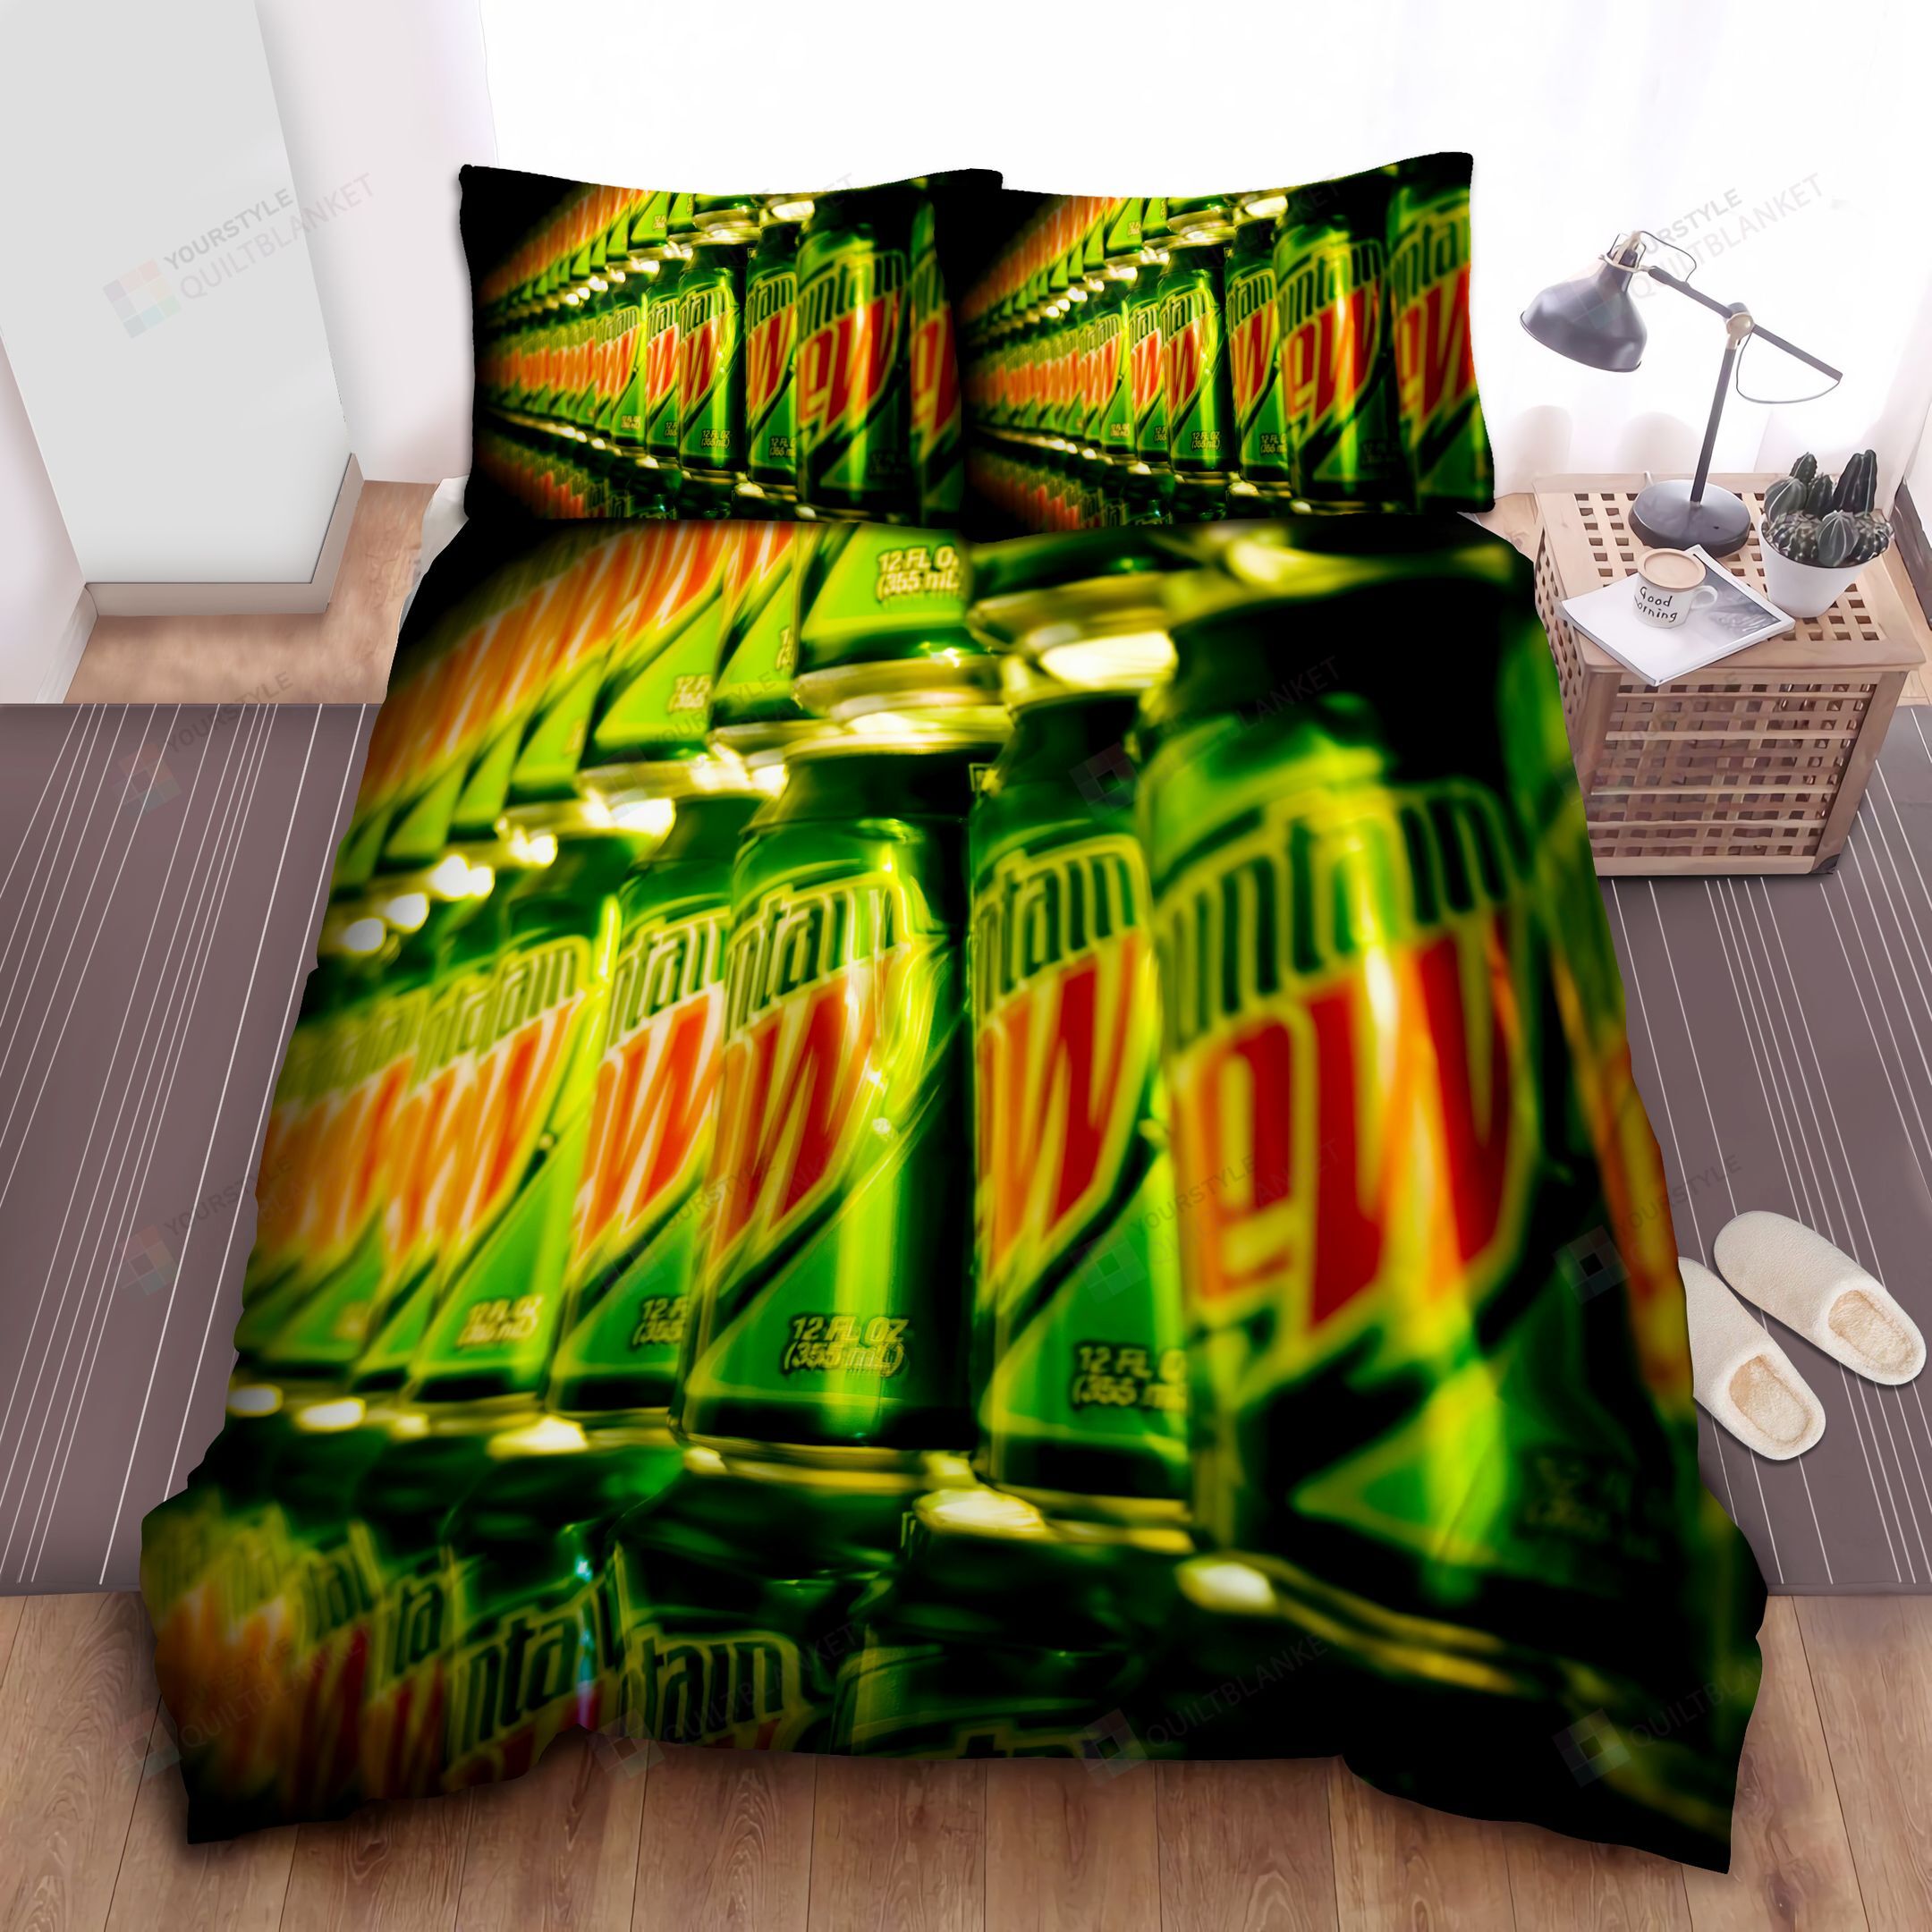 Mountain Dew Cans Bed Sheets Spread Comforter Duvet Cover Bedding Sets